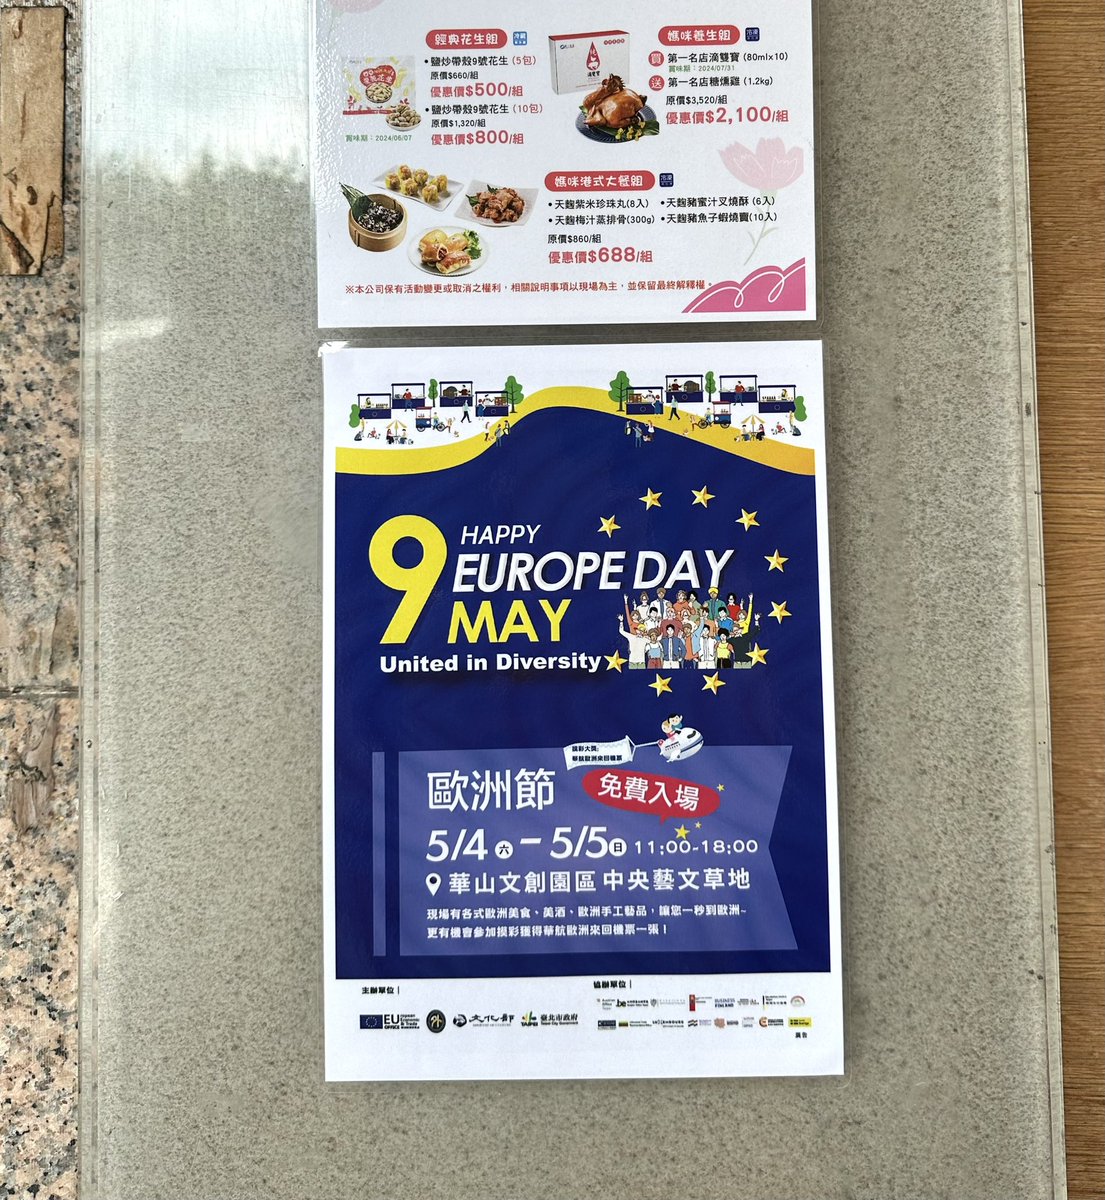 Nice to spot this on the streets of Taipei! Celebrating Europe Day every year has helped bring #Europe closer to #Taiwan. Join the celebrations hosted by EETO @grzegorzewskif this coming weekend, in Huashan Park.